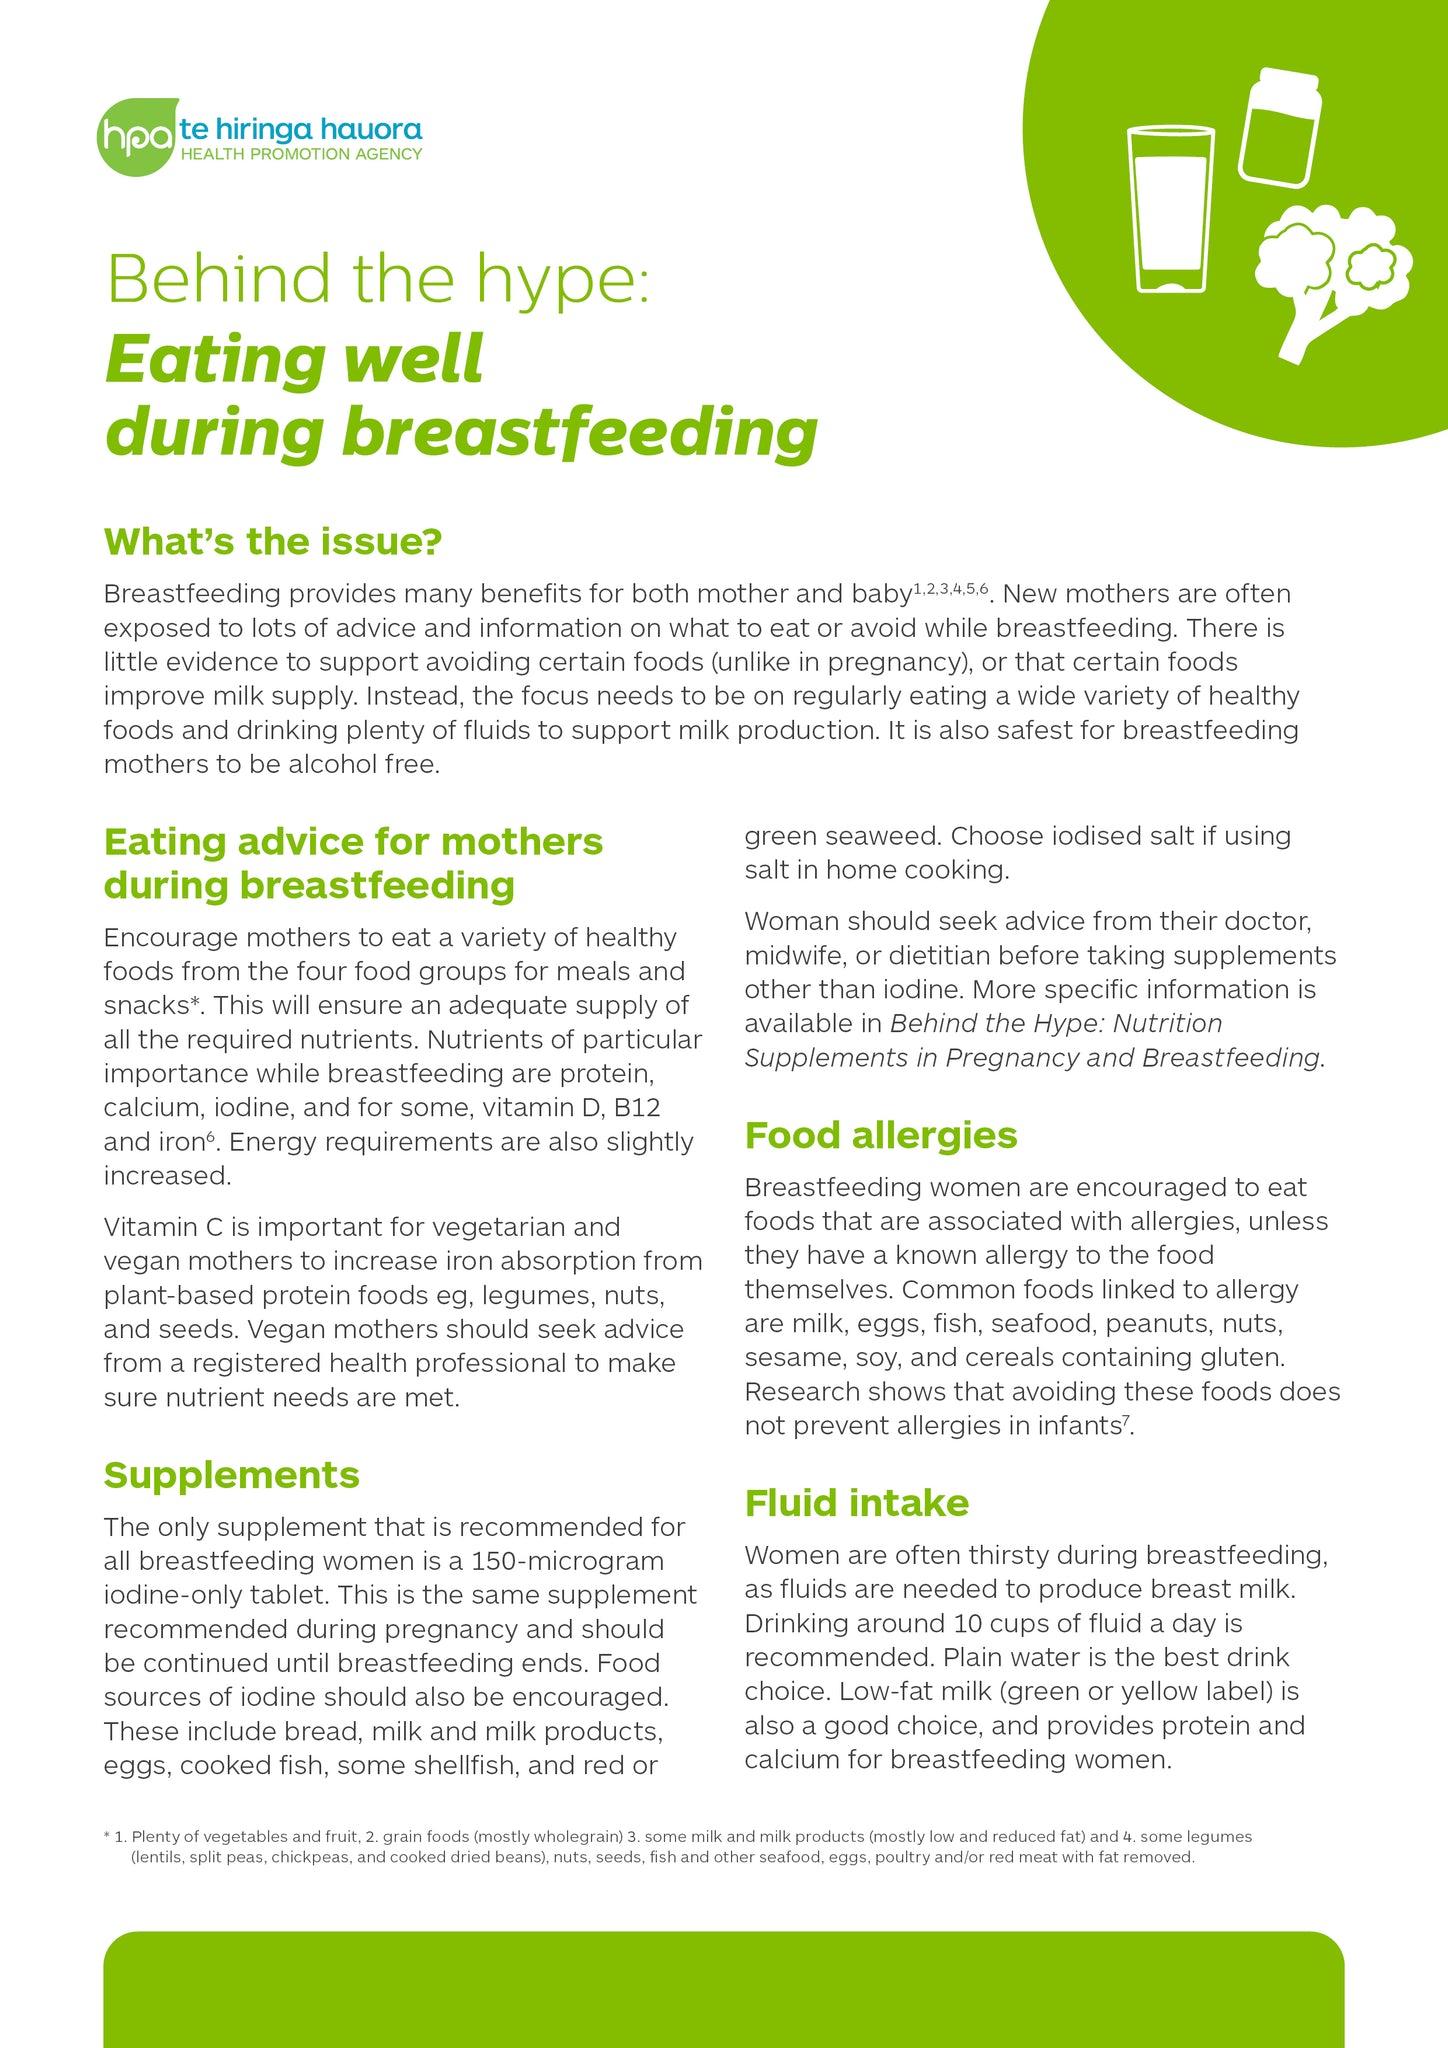 Behind the hype: Eating well during breastfeeding - Digital only